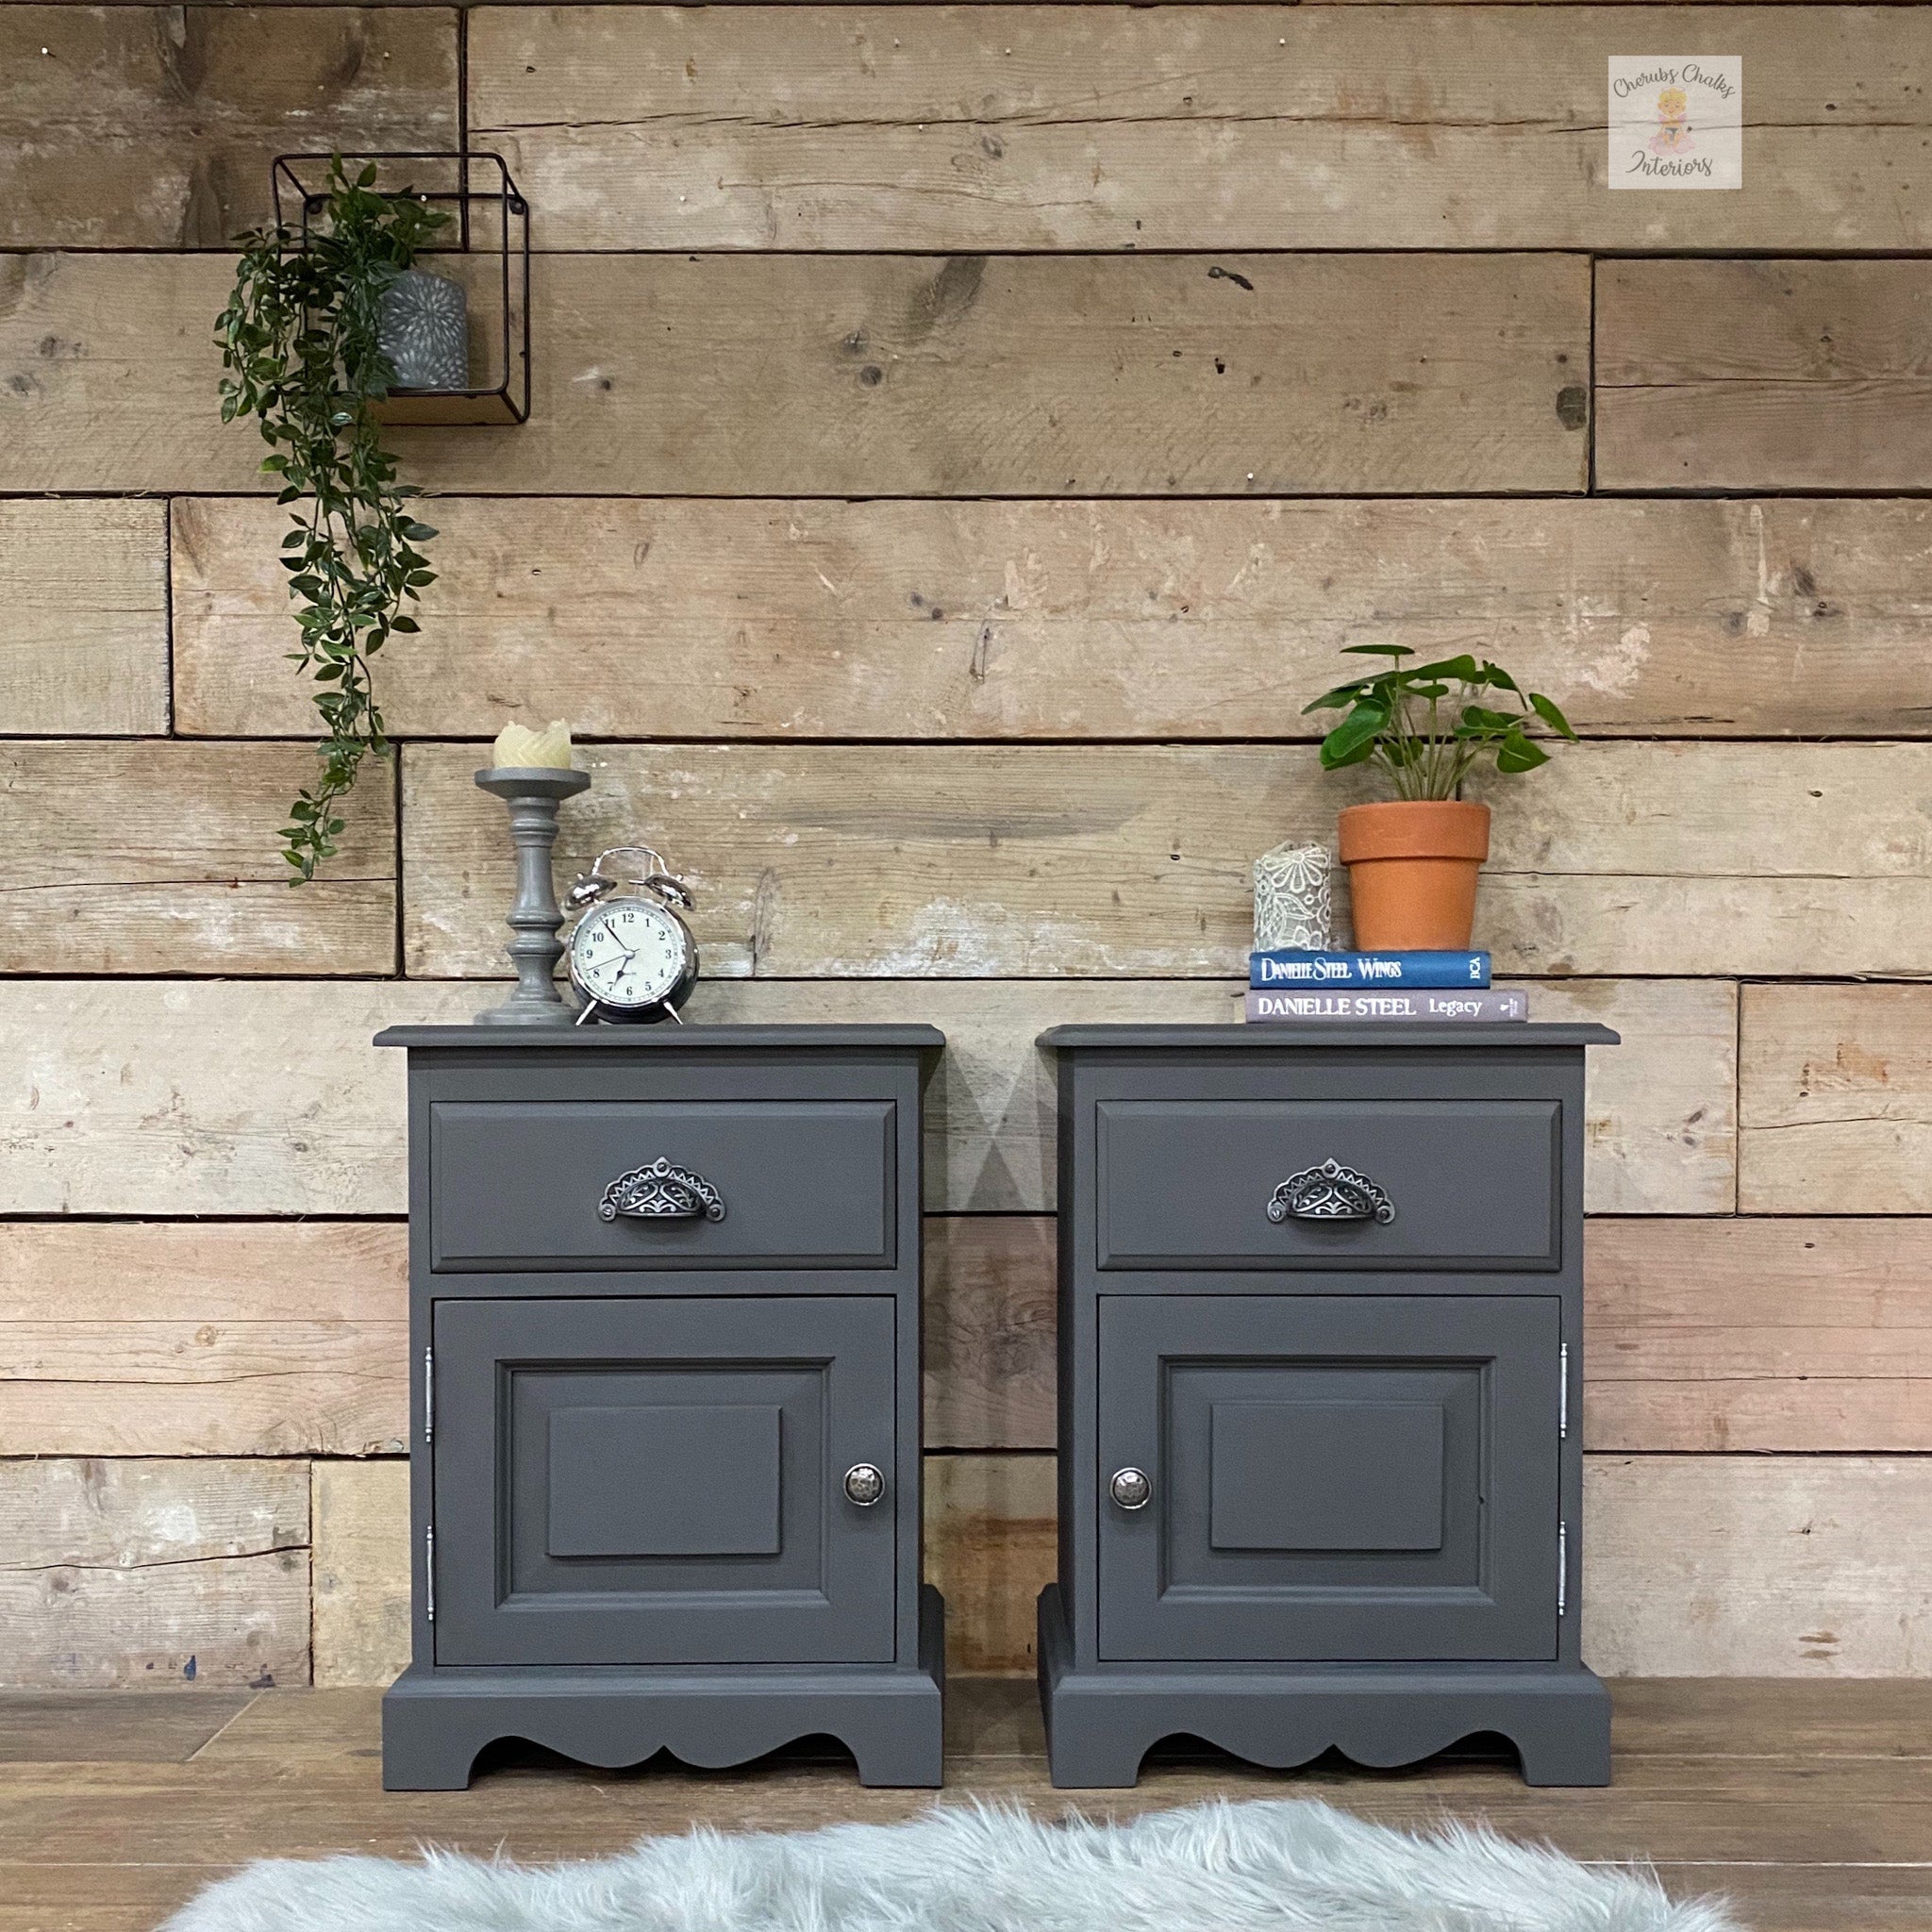 Two vintage nightstands refurbished by Cherubs Chalks Interiors are painted in Dixie Belle's Gravel Road chalk mineral paint.